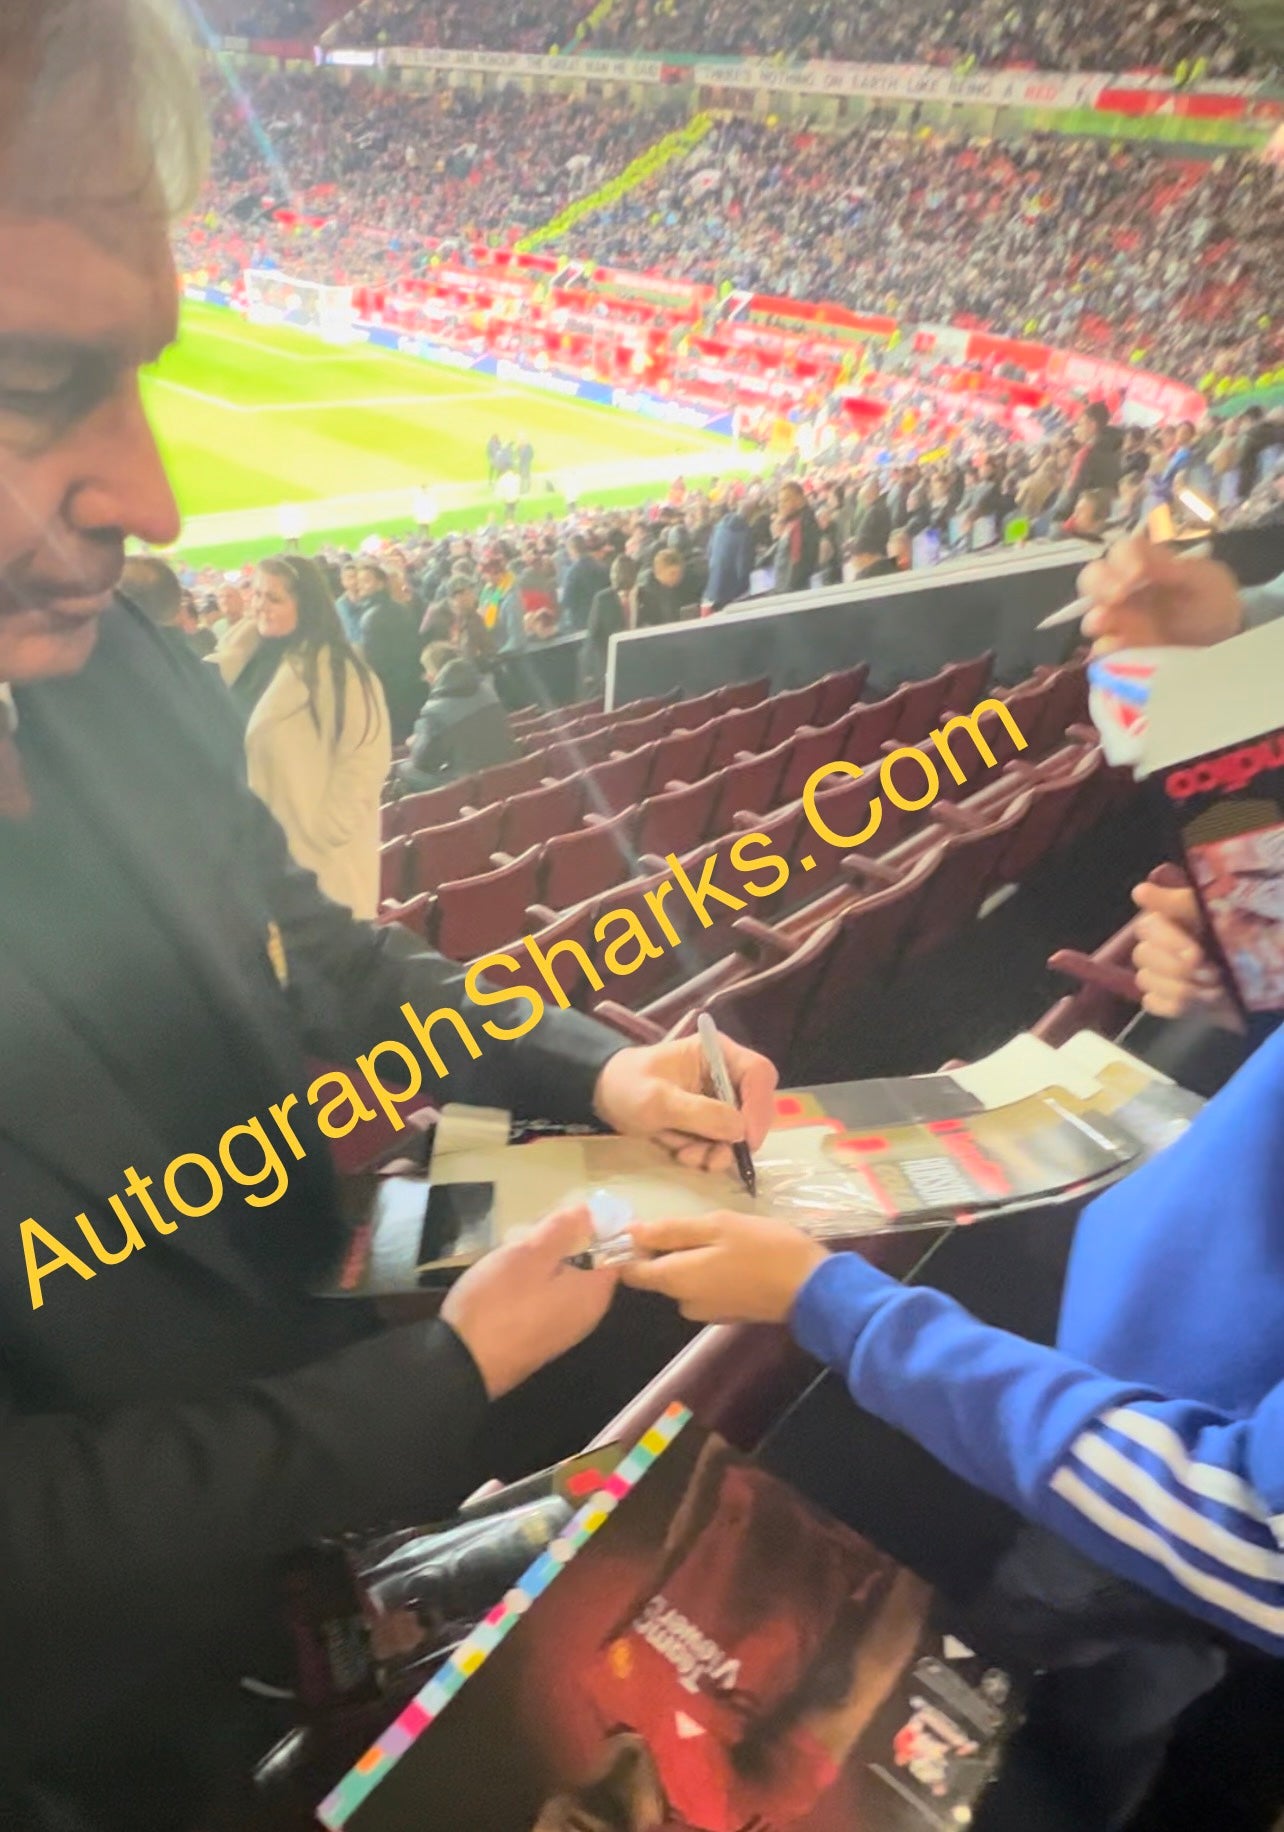 Featured Product: Signed Bryan Robson “Robson Gold” Shinguards